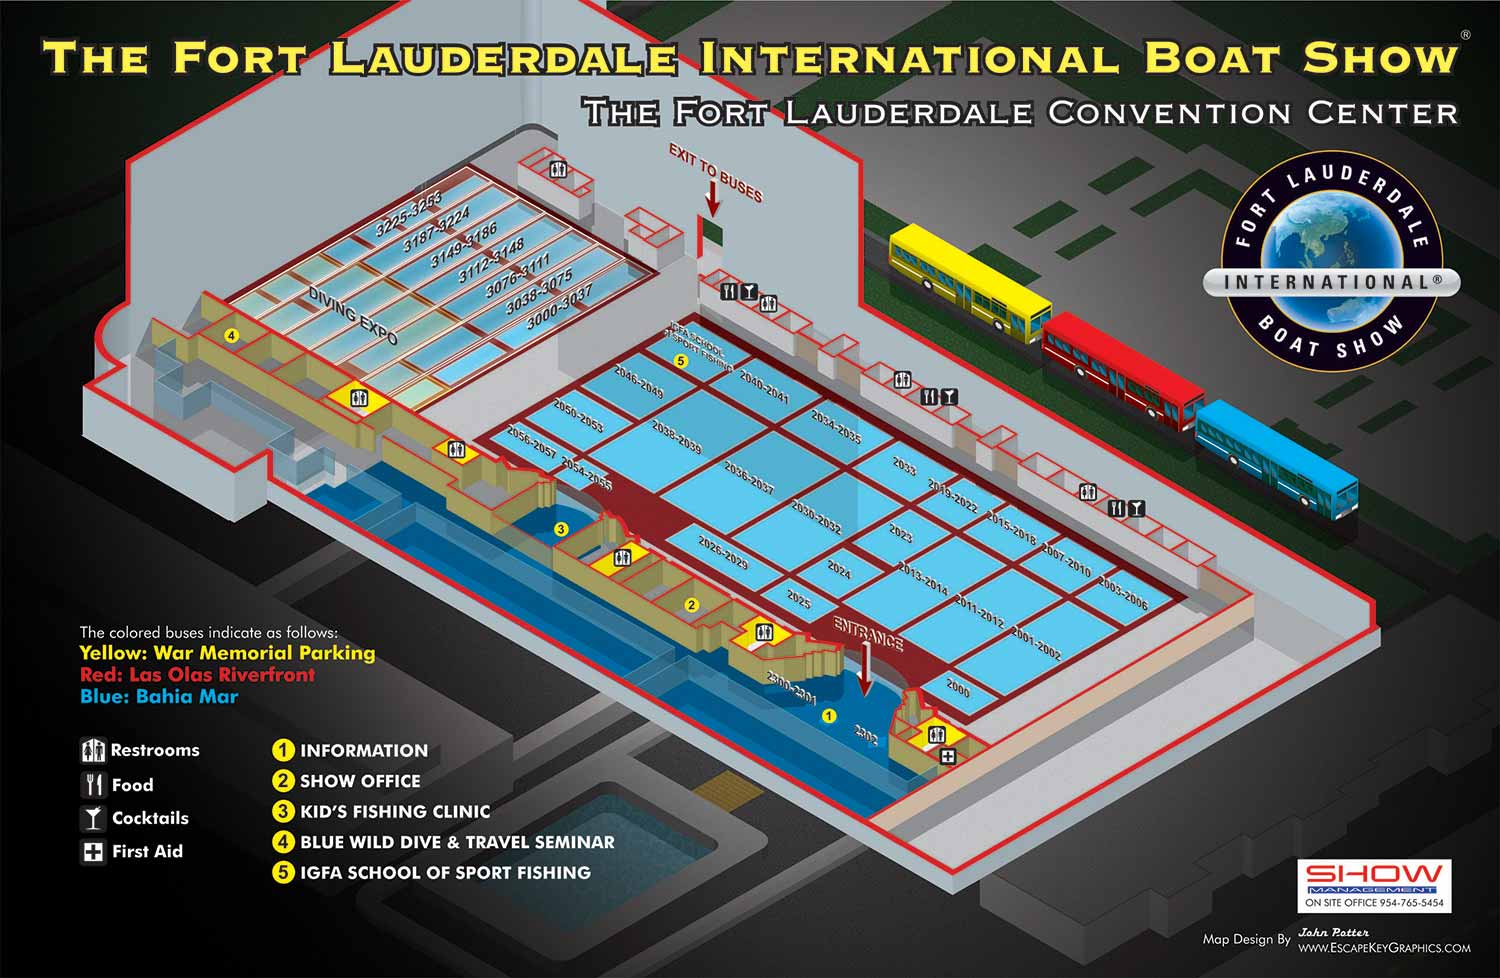 Fort Lauderdale International Boat Show Broward County Convention Center Map